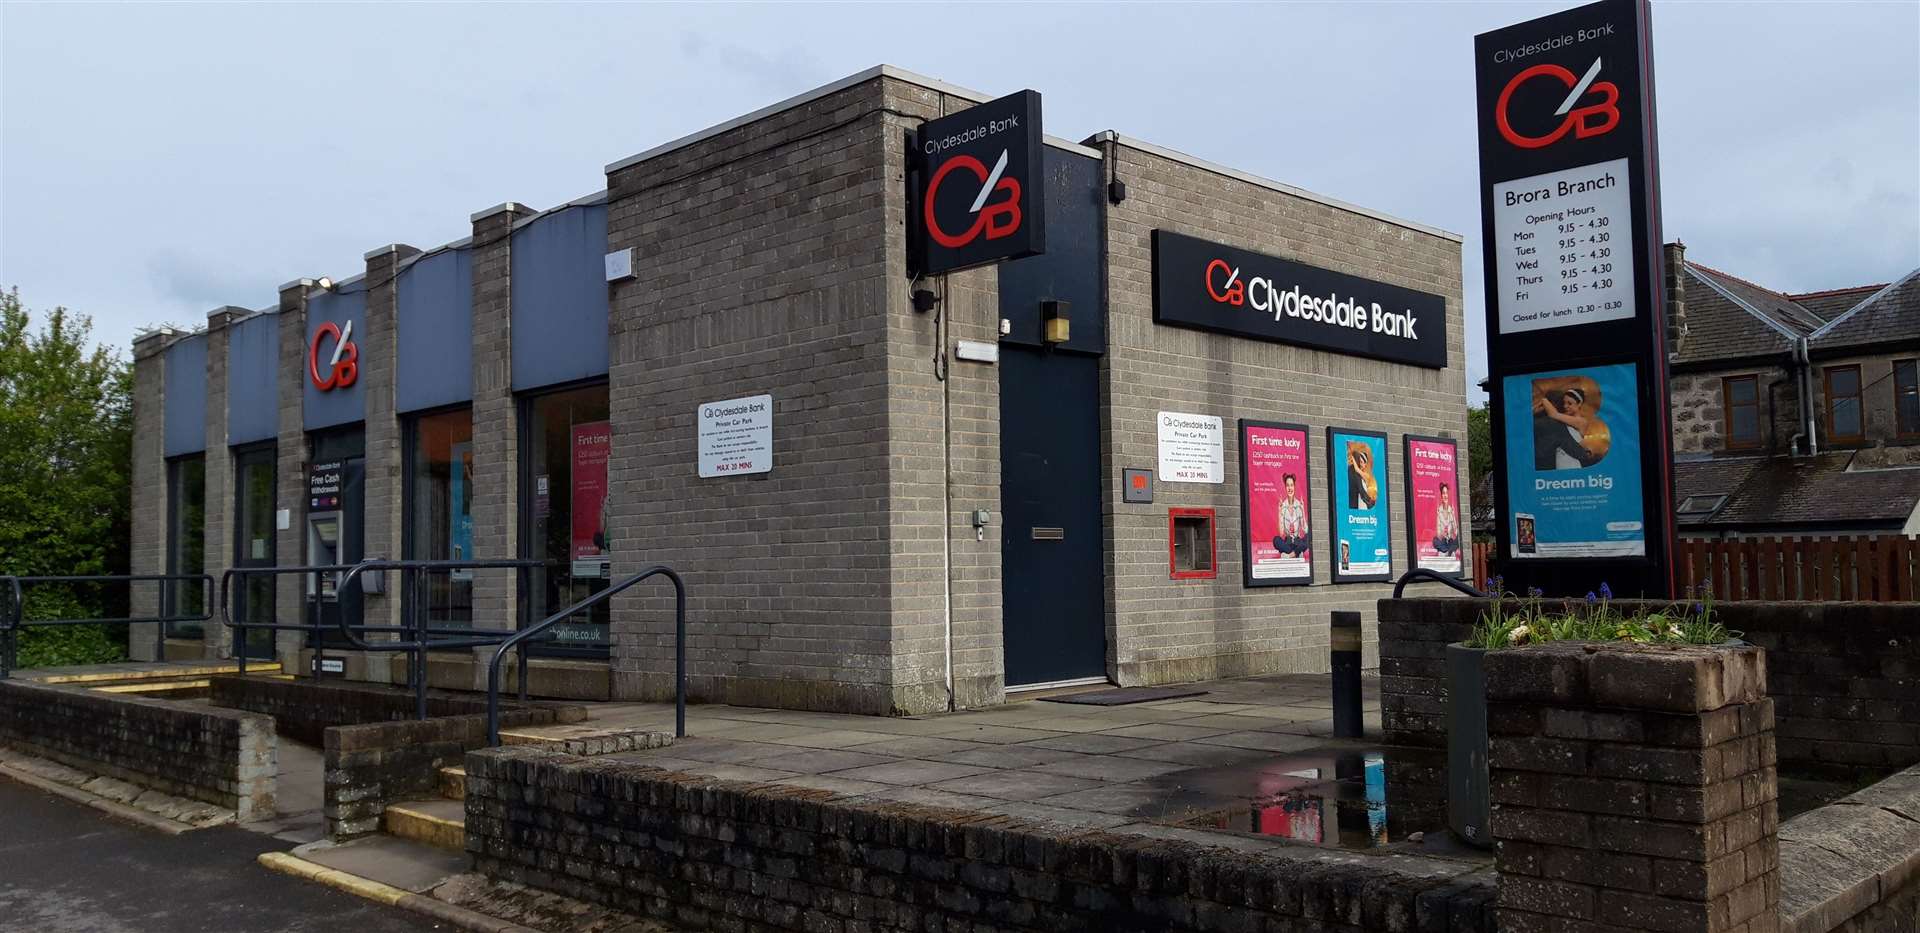 The Clydesdale branch in Brora is to close later this year.